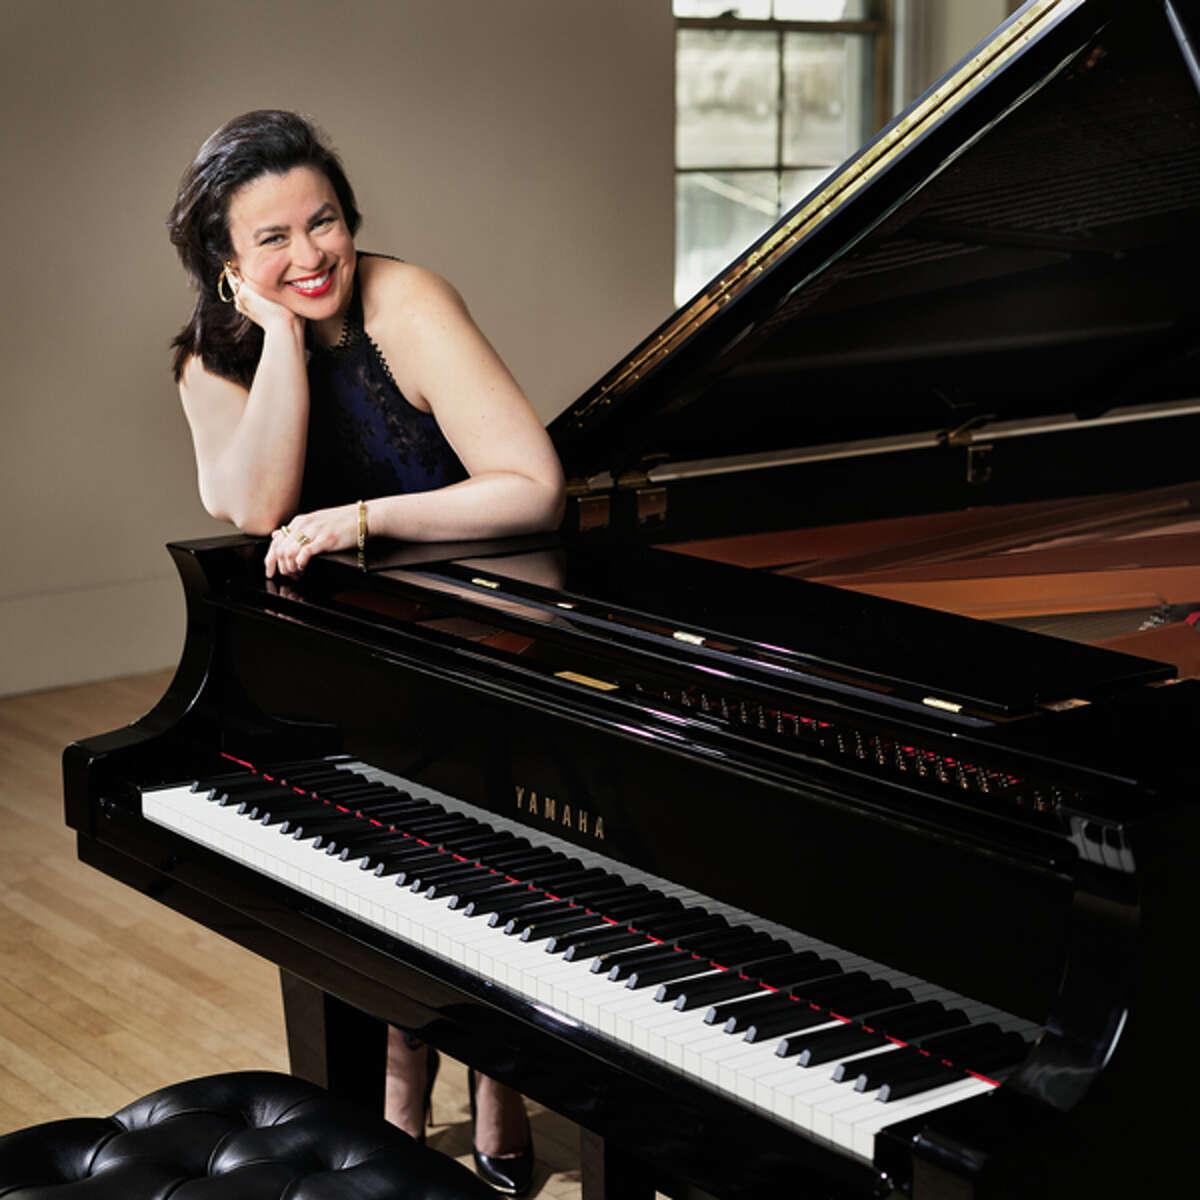 The Palace Theater's spring jazz series kicks off April 14 with Sarah J. Cion, followed by Kristina Koller on April 28, the Champian Fulton Trio, pictured, on May 19, and the Joe Alterman Quartet presented by Litchfield Jazzfest on June 2.